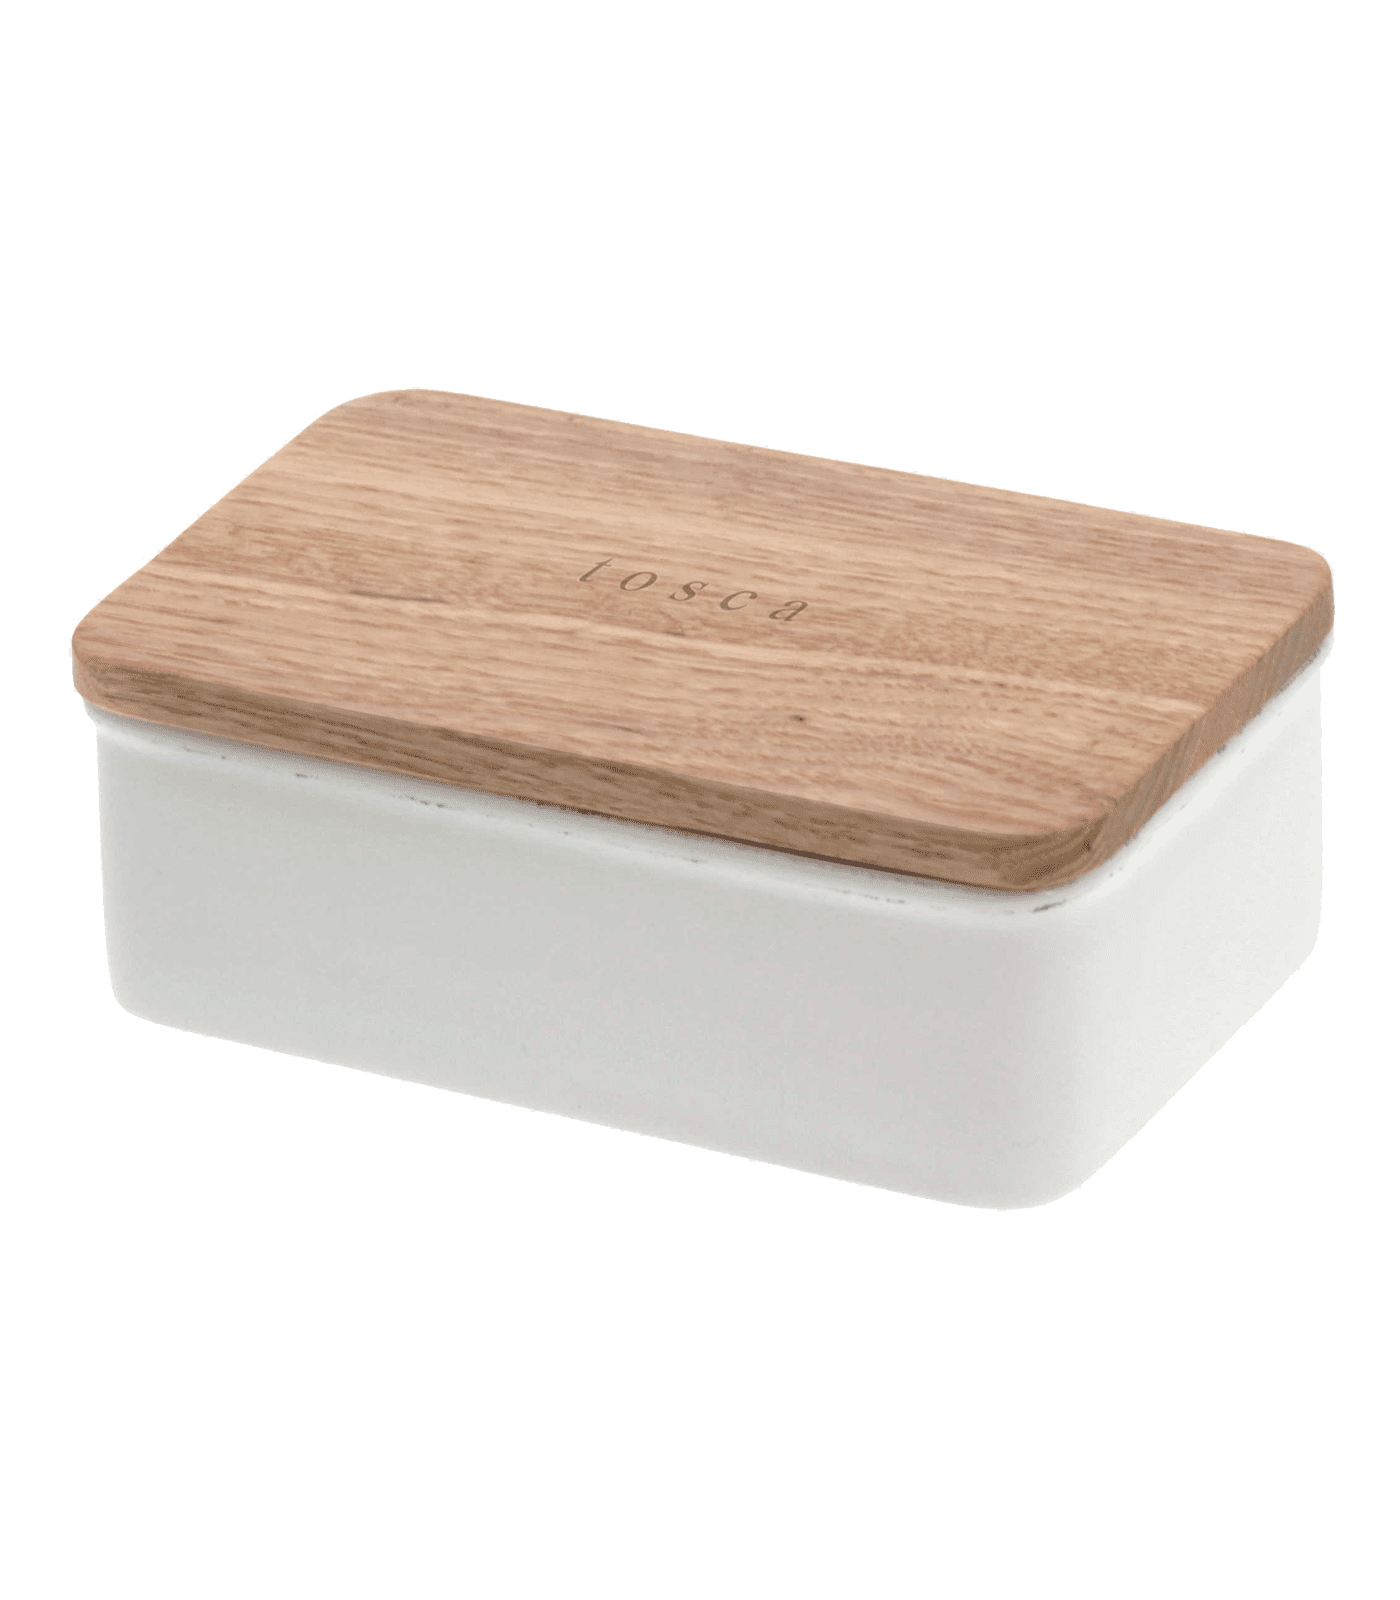 Butter Dish Melamine Butter Dish with Wooden Lid Airtight Butter Box for 250 g Butter Table Fine Storage